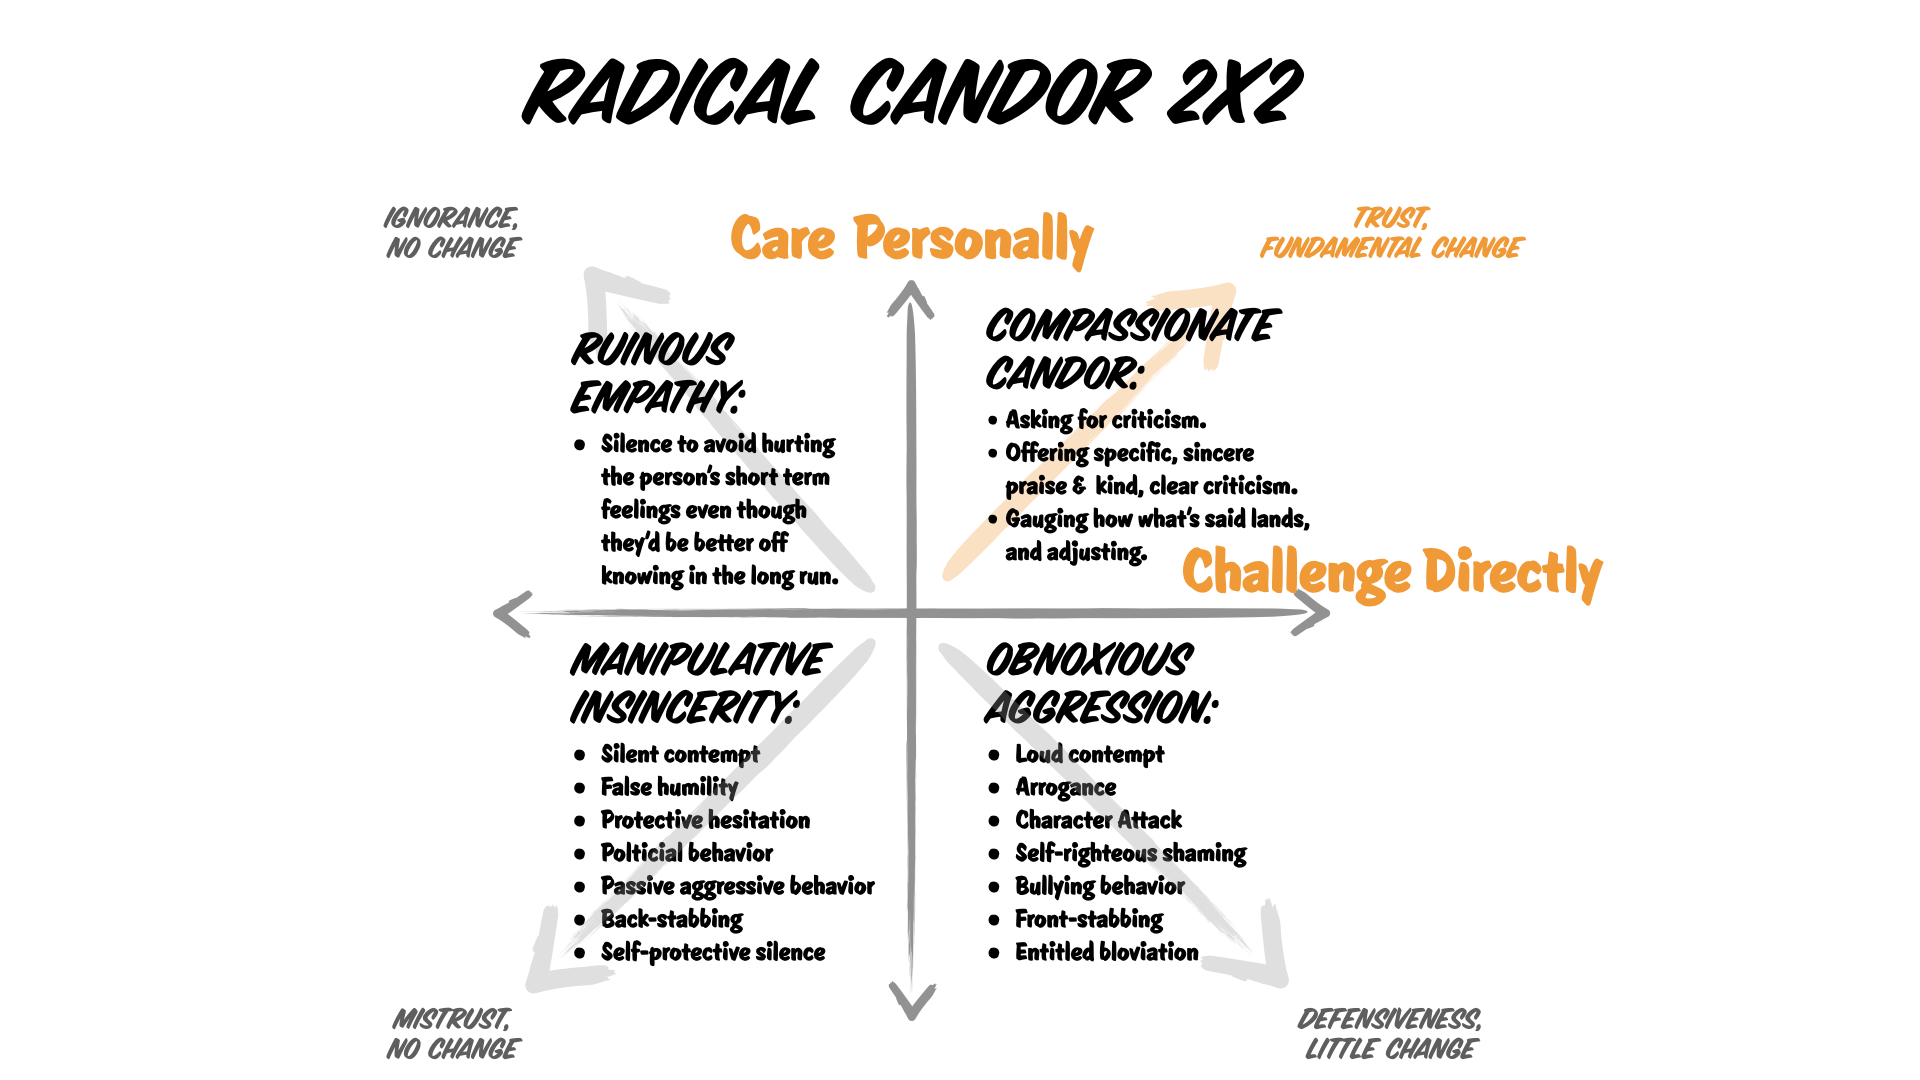 Kim Scott 🇺🇦 #BLM on X: Hey,@economist, Radical Candor, also called  Compassionate Candor, means Care Personally and Challenge directly at the  same time, with the emphasis on Care Personally. You've confused it